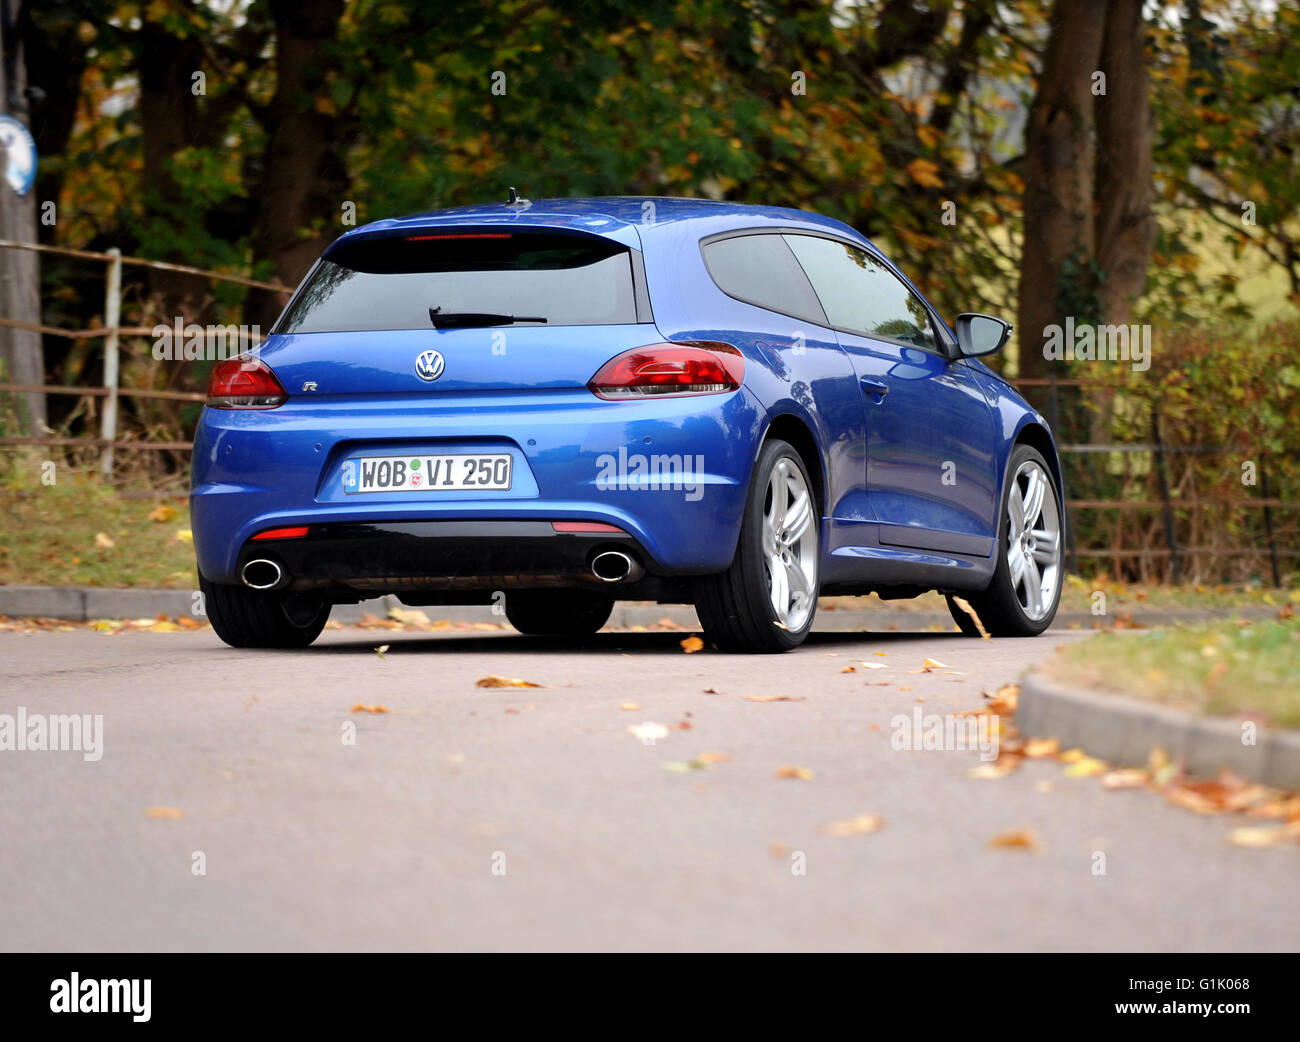 2009 VW Scirocco R performance car driving Stock Photo - Alamy